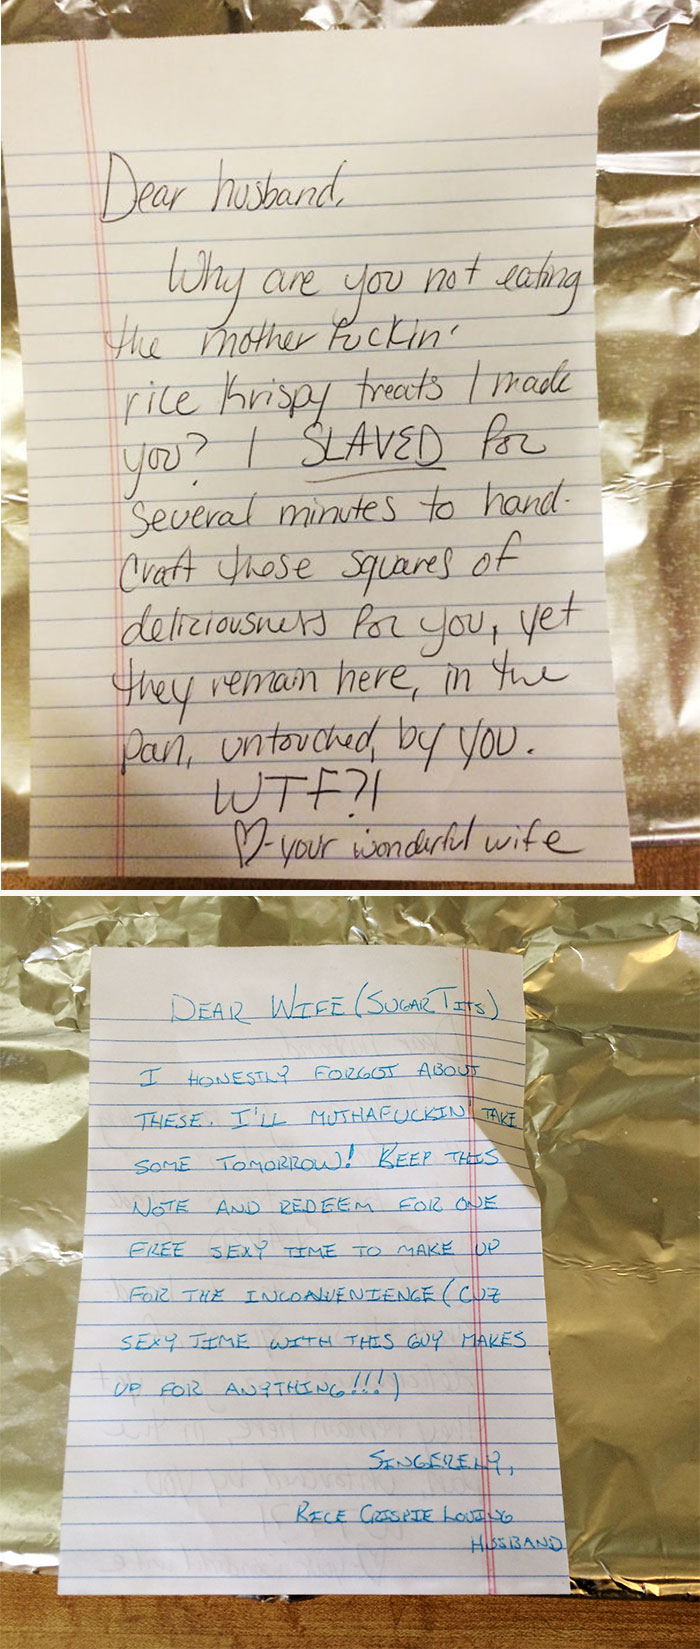 18 Hilarious Love Notes By Couples With A Sense Of Humour  Bored